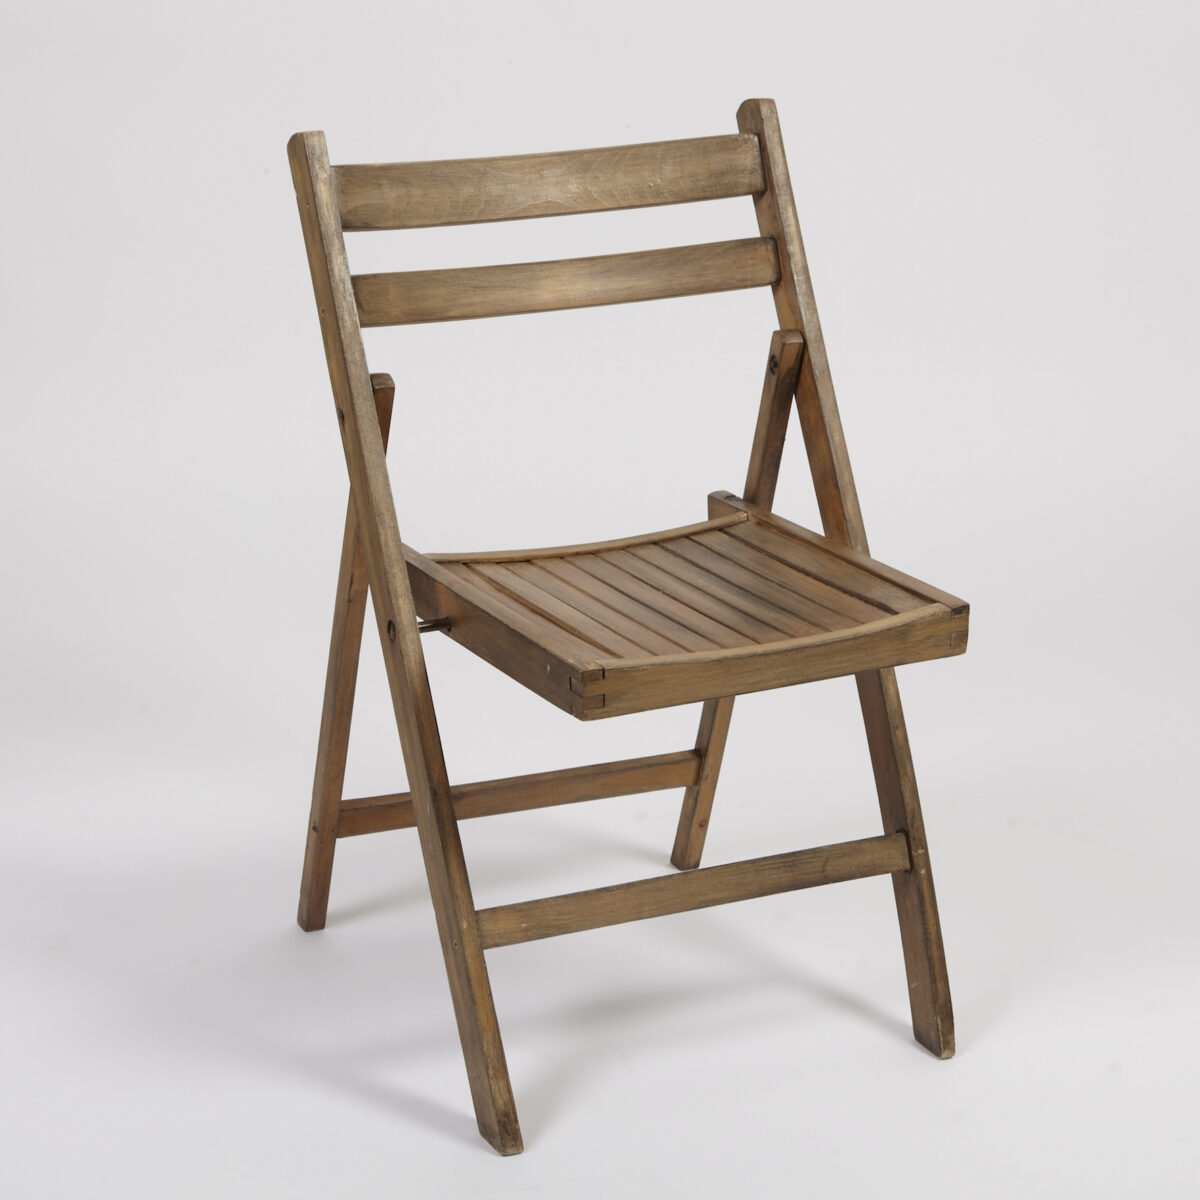 Wooden Folding Chair 1 1200x1200 Cropped 